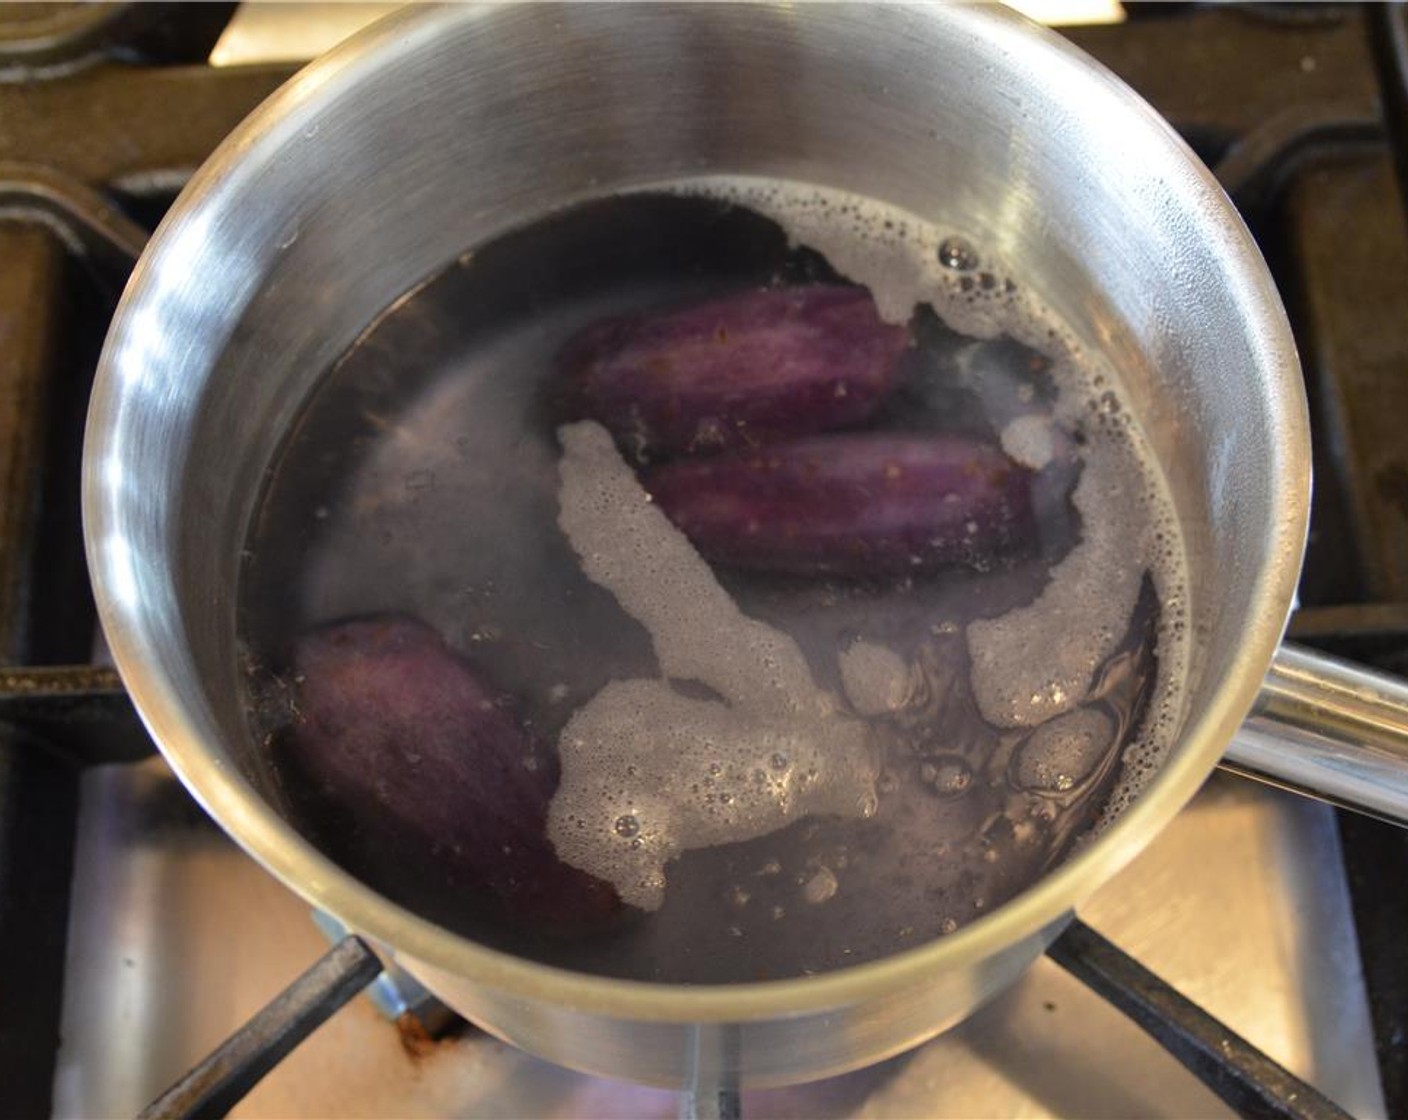 step 10 Wash and peel the Purple Potatoes (1 1/3 cups) then place in a small pot. Cover with water and bring to a boil. Reduce to a simmer until the potatoes are fully cooked about 15 to 20 minutes.